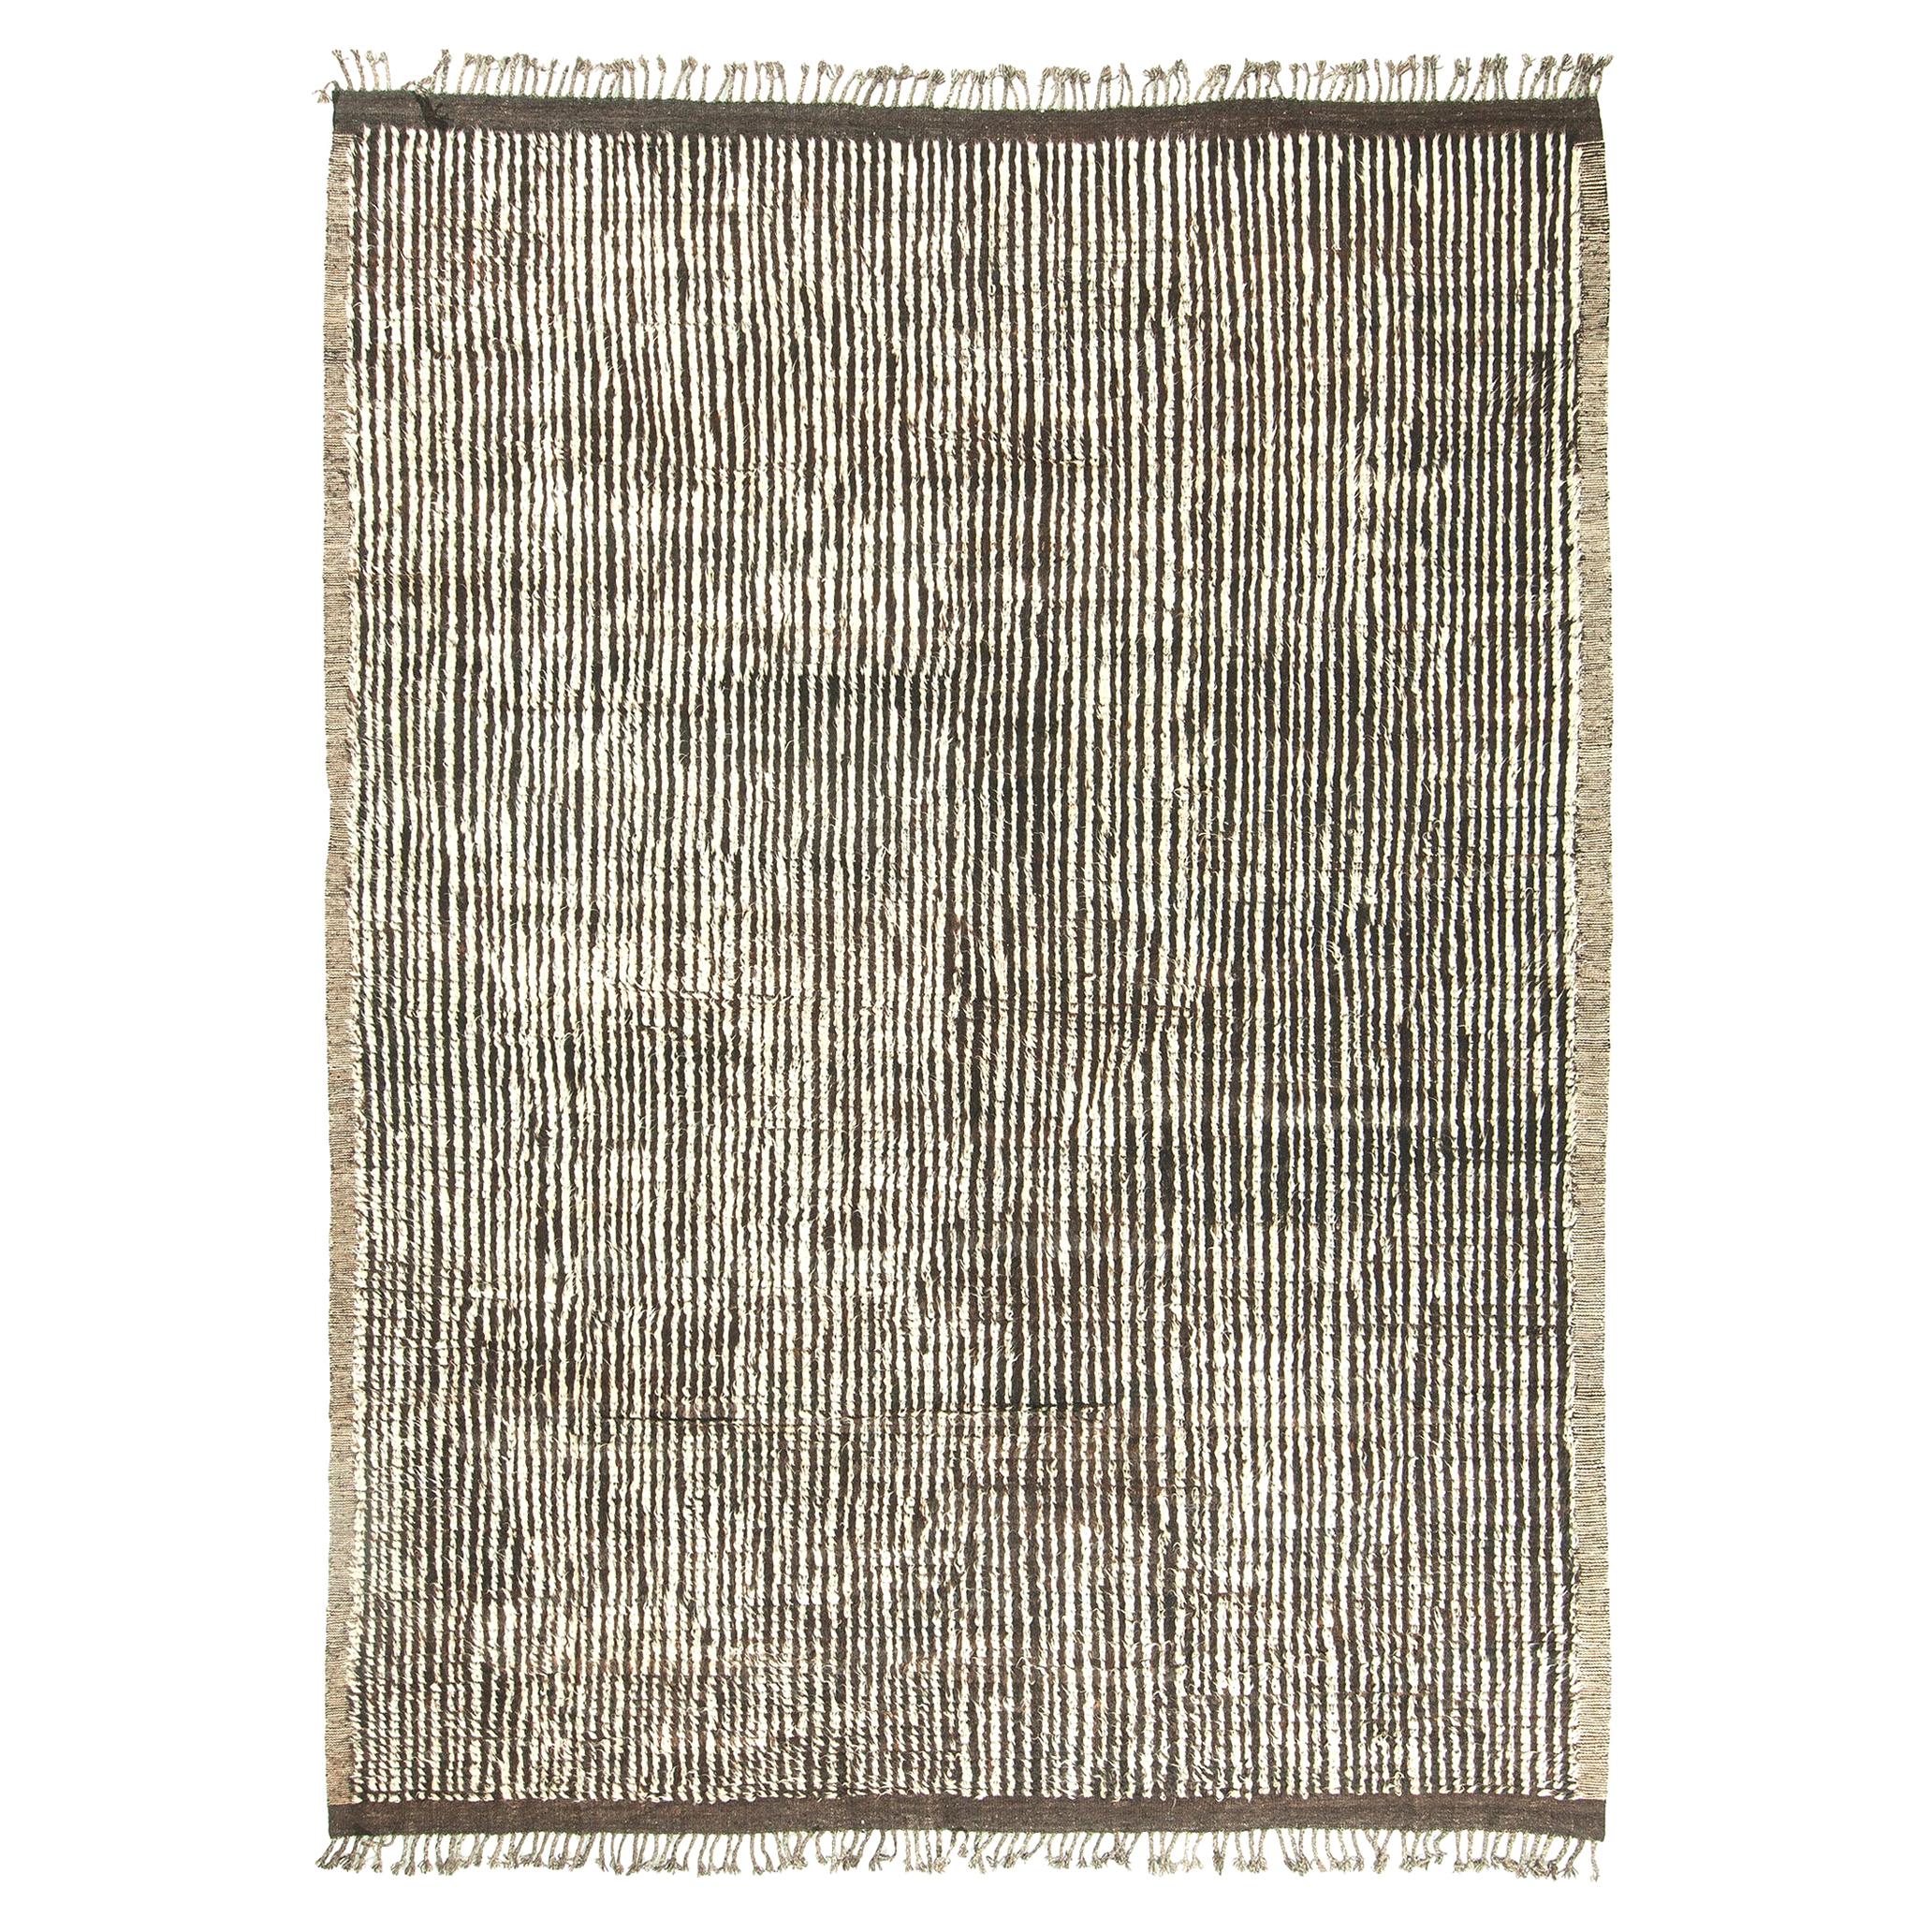 Nazmiyal Collection Modern Boho Chic Rug. 10 ft 4 in x 13 ft 8 in